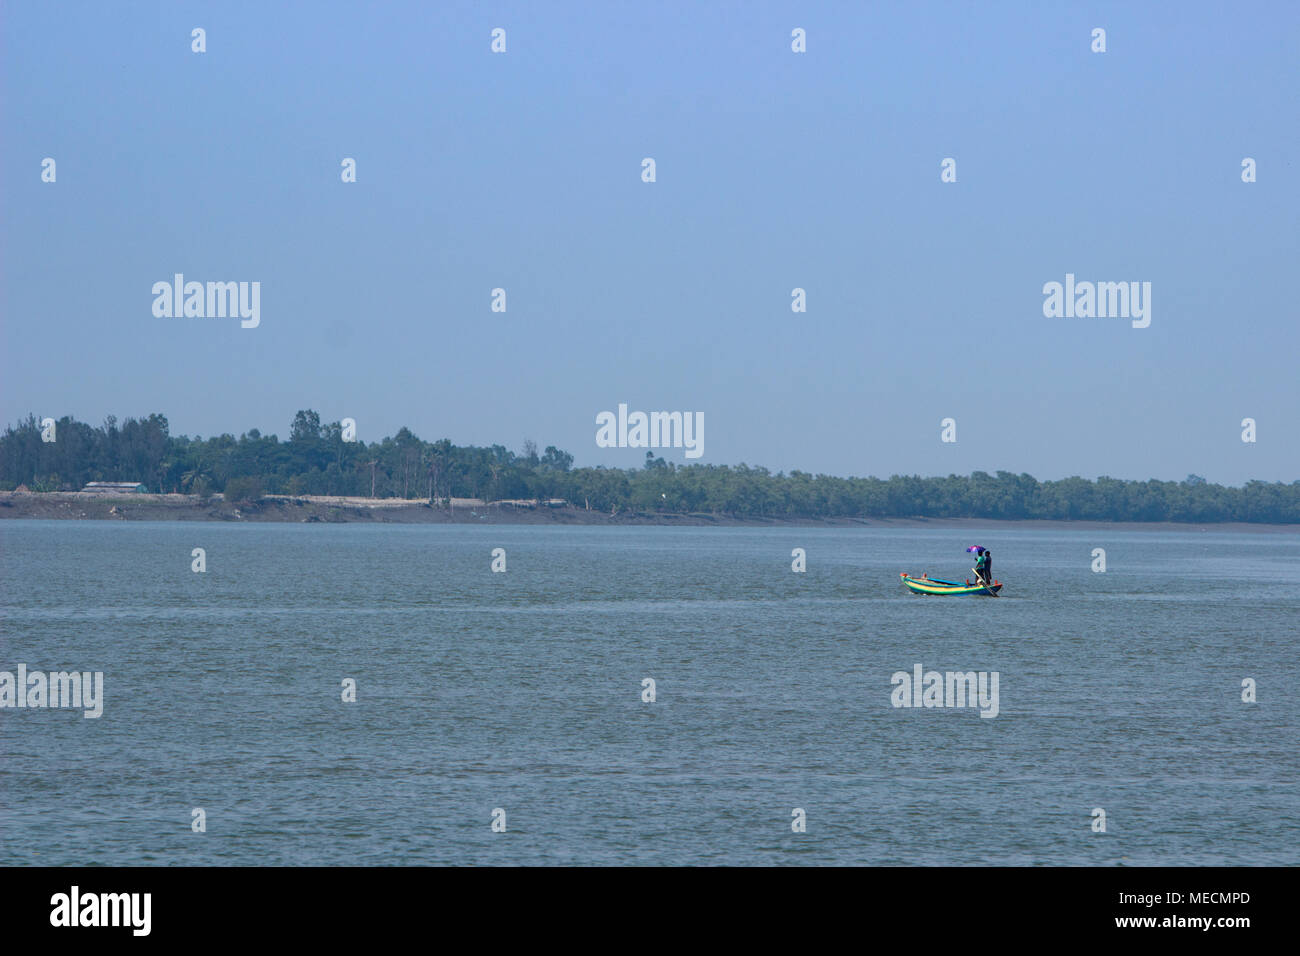 Boat and ships on the Sunderbans Stock Photo